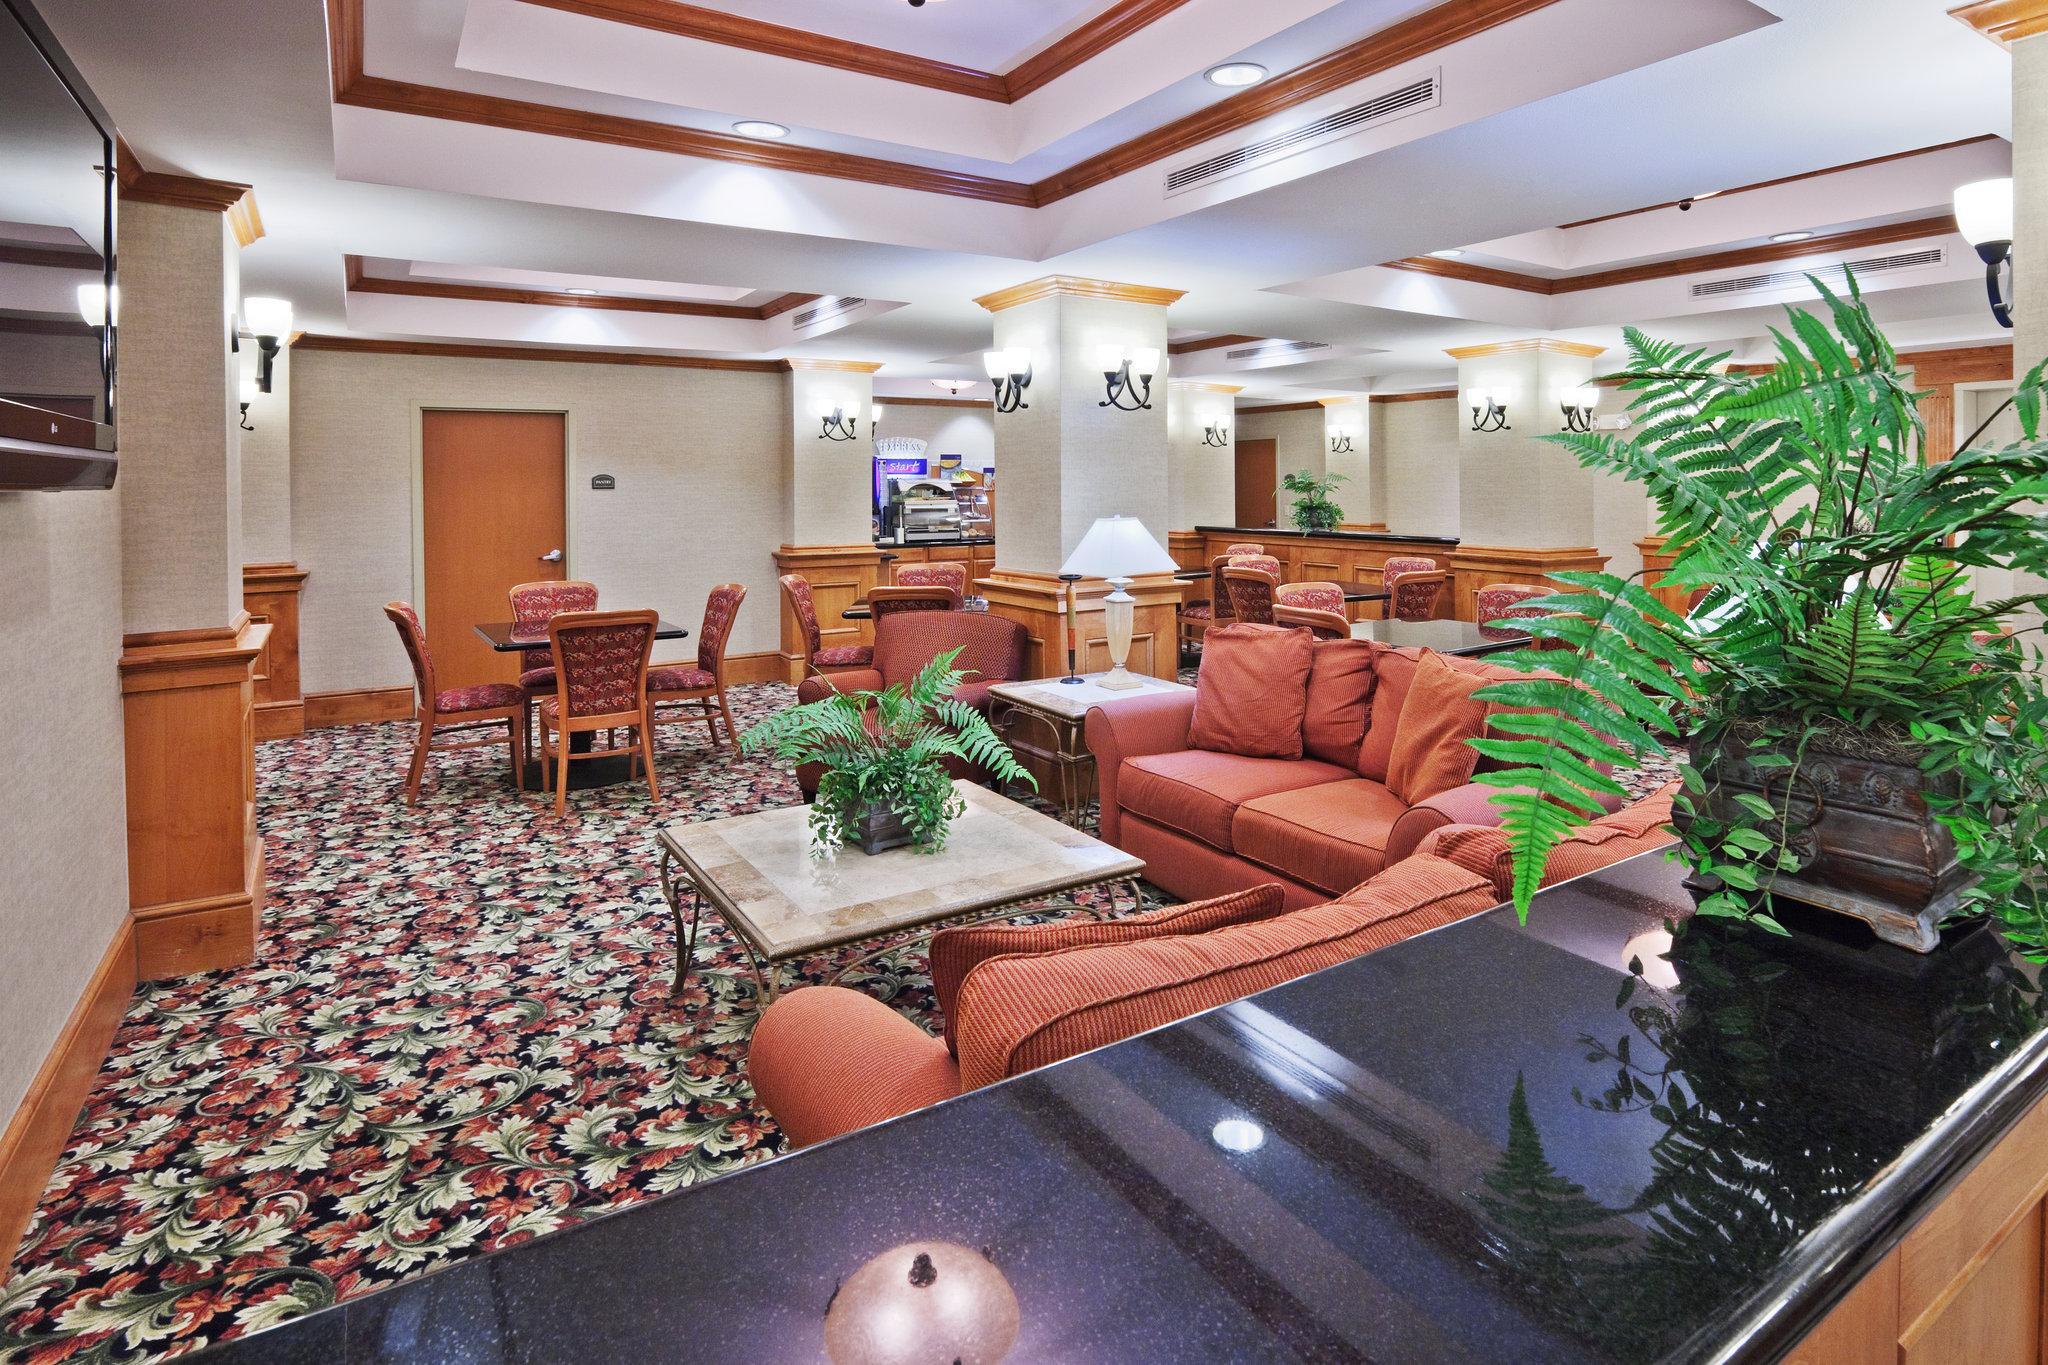 Photo of Holiday Inn Express & Suites Lawton-Fort Sill, Lawton, OK